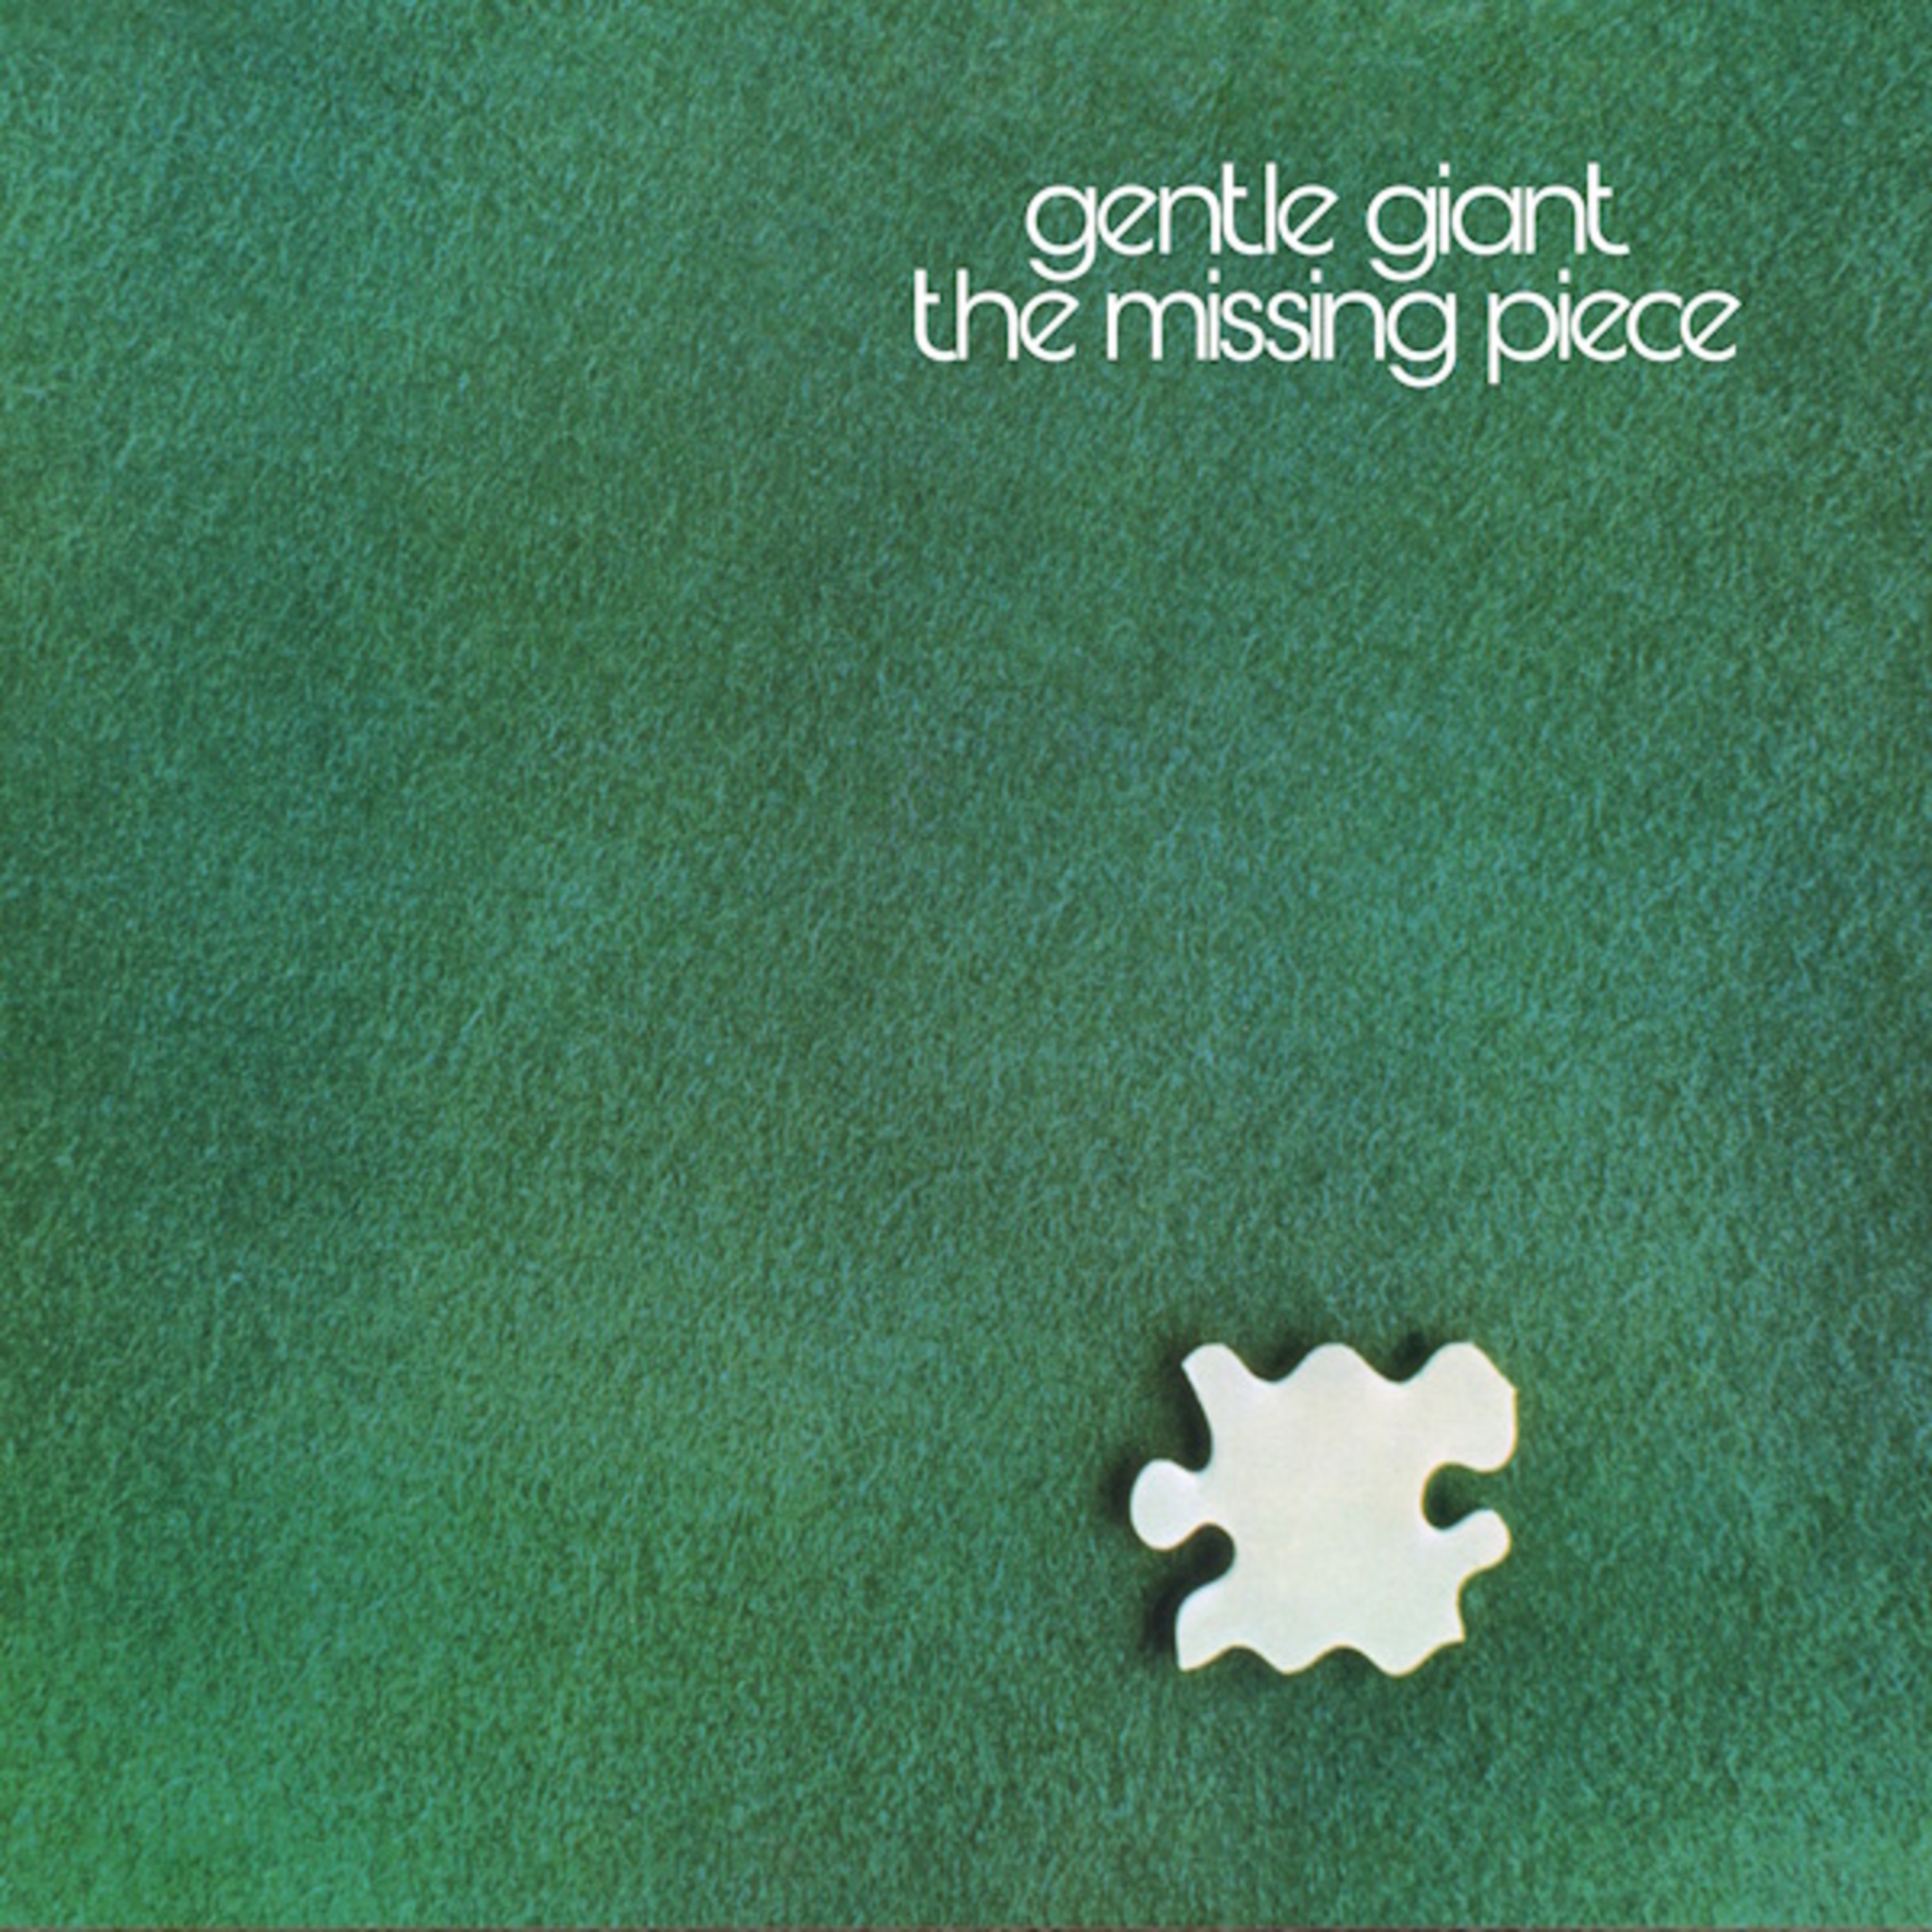 Prog Legends Gentle Giant’s “The Missing Piece” Steven Wilson Remix To Be Released on CD, 5.1 Blu-Ray, 180g Vinyl & Limited Edition Transparent Green Vinyl on February 16, 2024